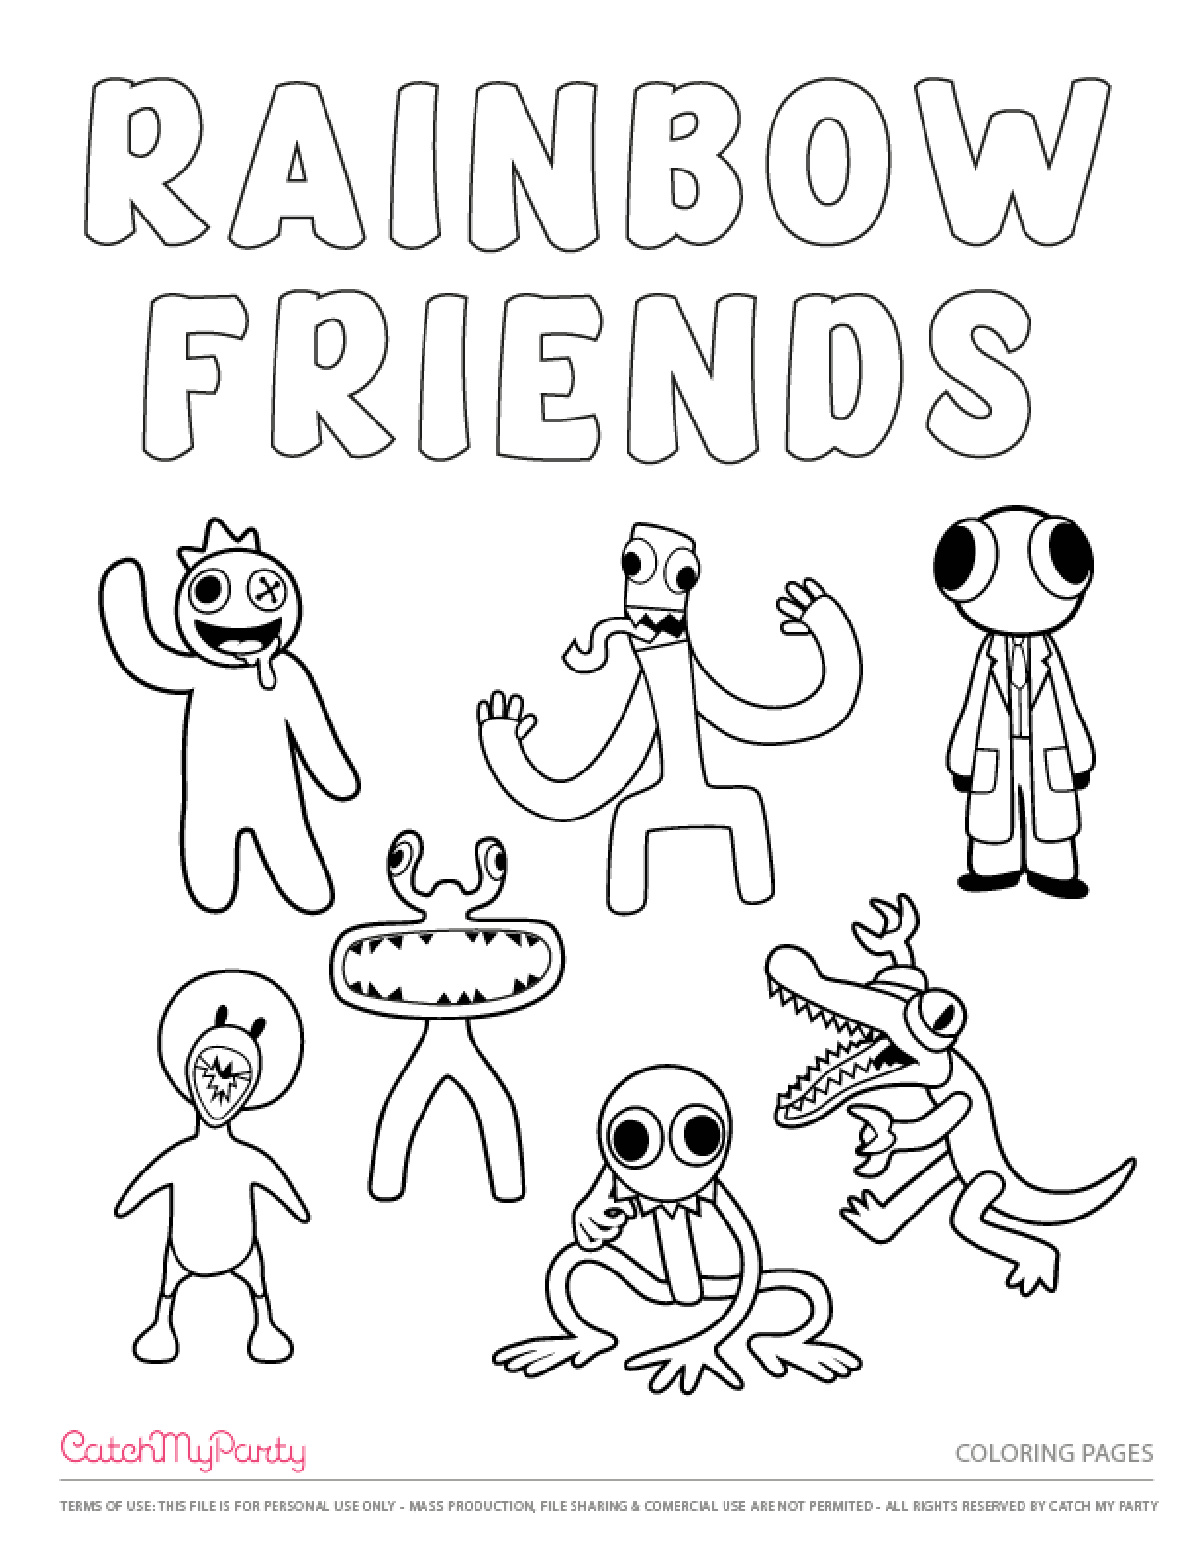 Free Rainbow Friends Party Printables -Coloring Sheets